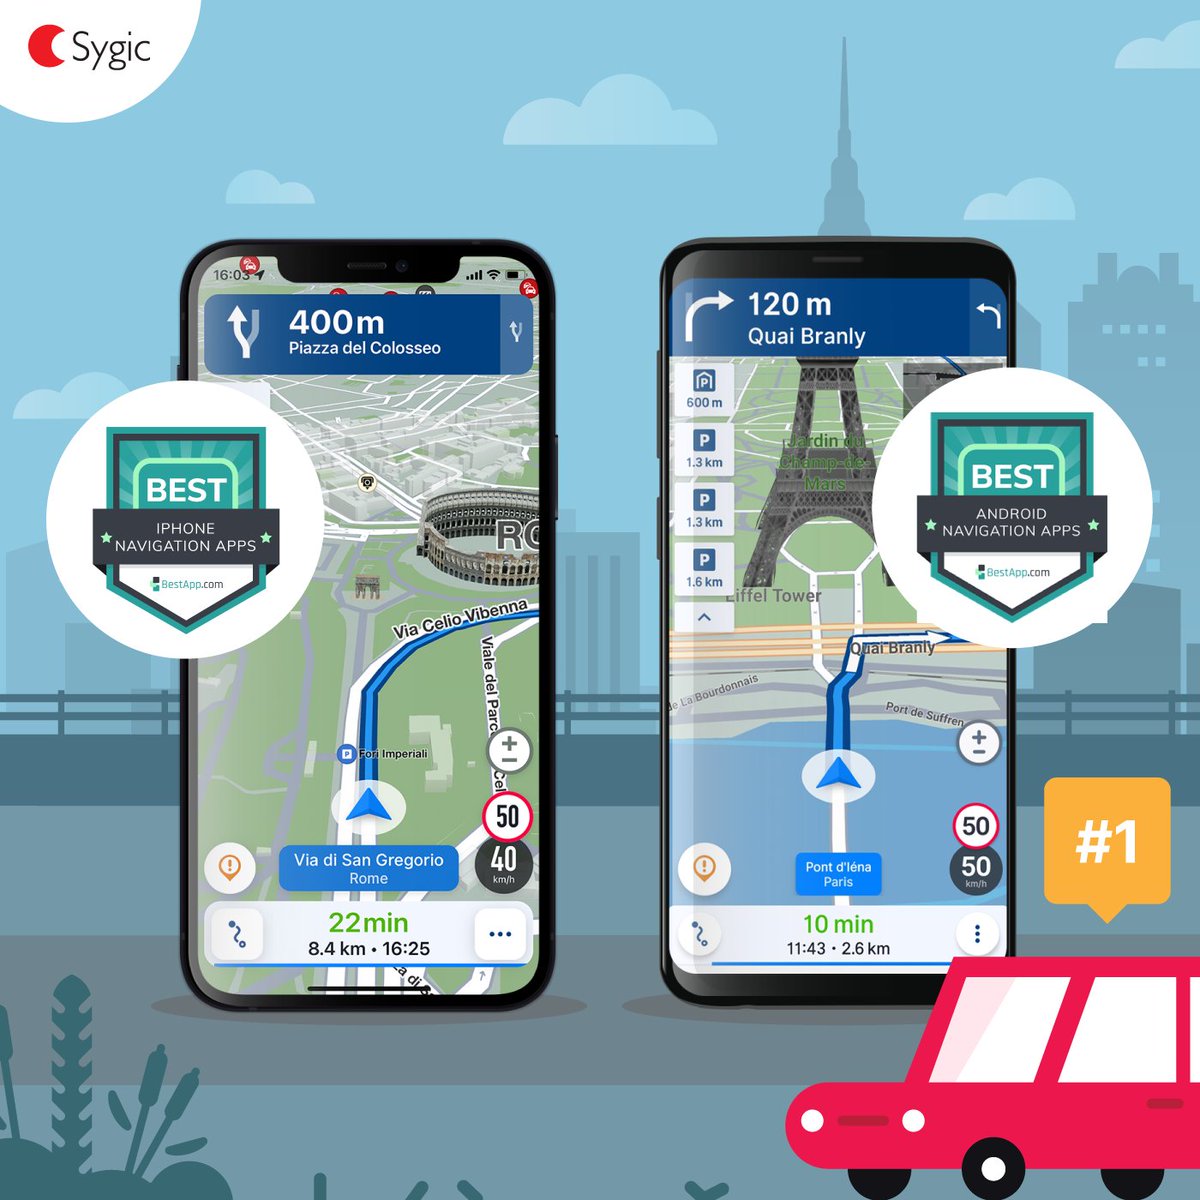 Sygic no Twitter: "A guide for the latest app tech trends https://t.co/yejObPD5X8 has announced #SygicGPSNavigation among the best navi apps for the of 2021 thanks to its reliability. This